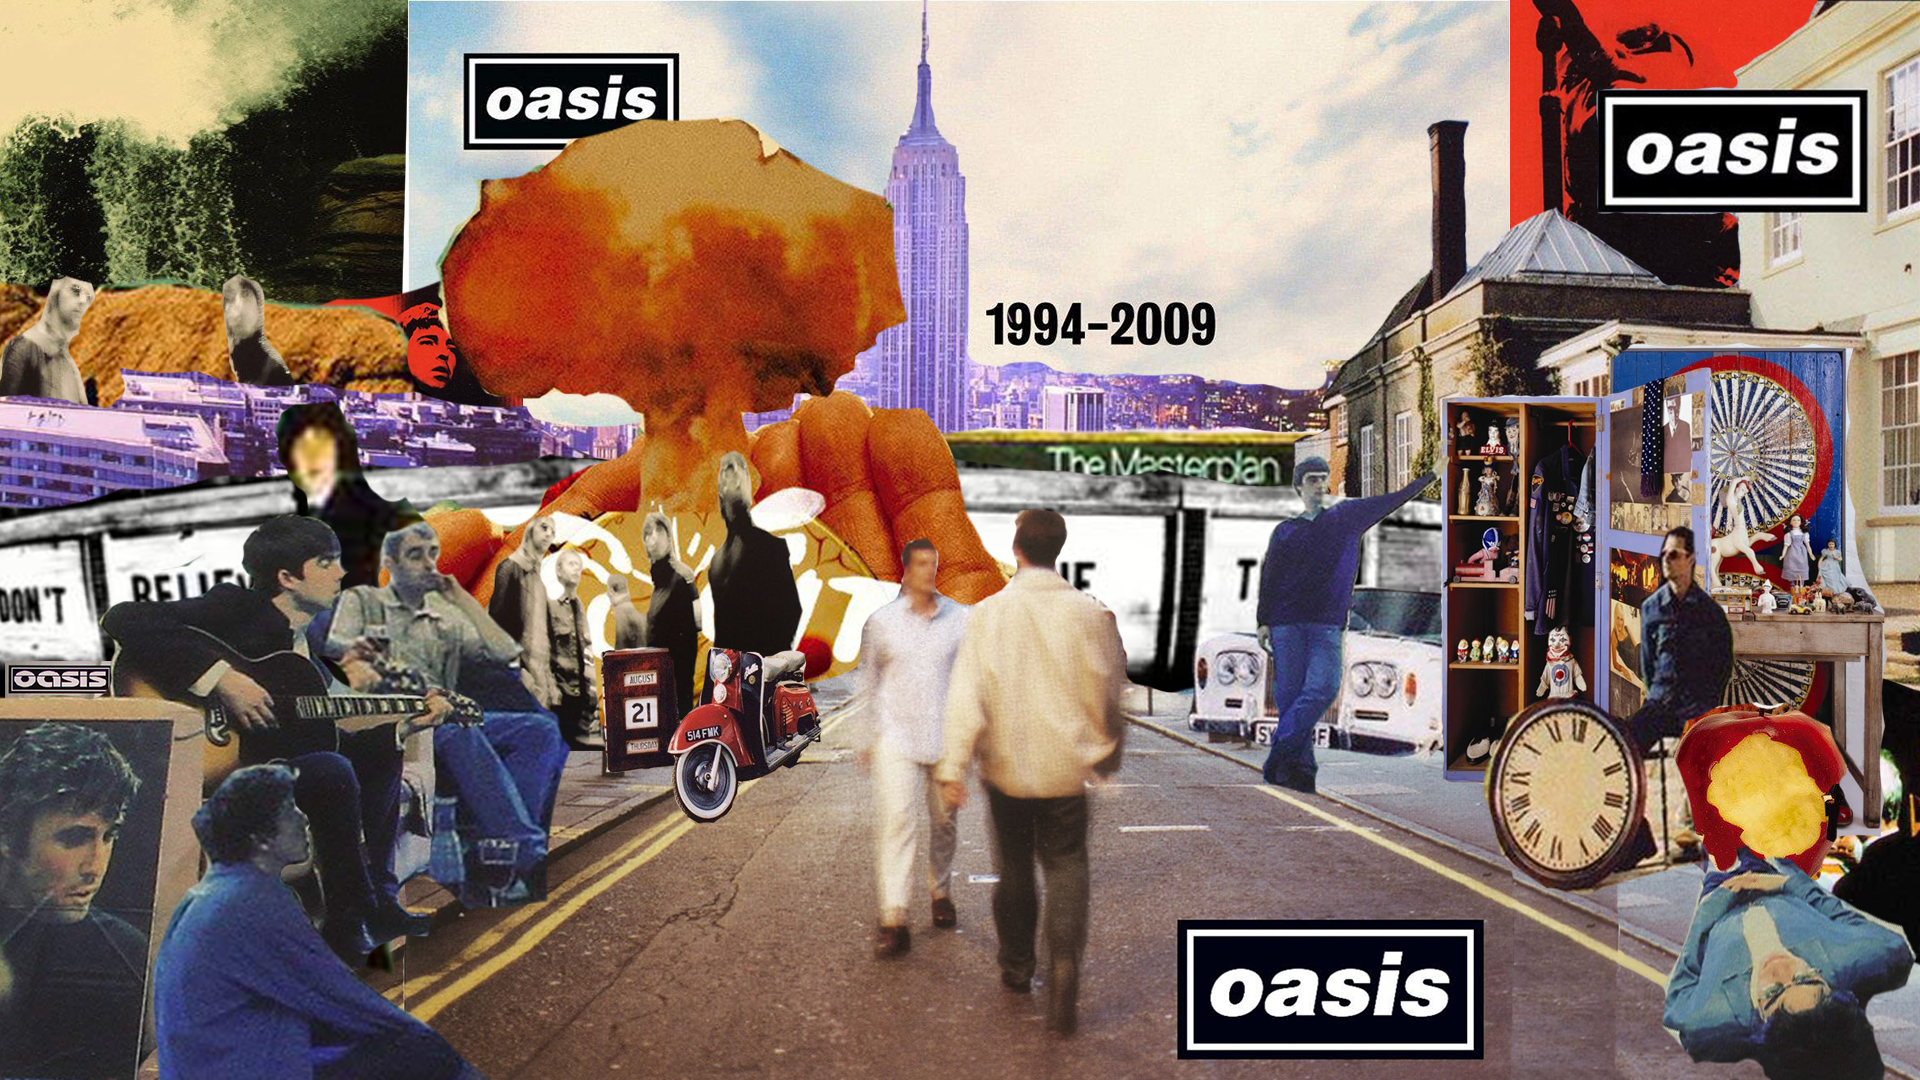 All 11 Oasis albums in one PC wallpaper